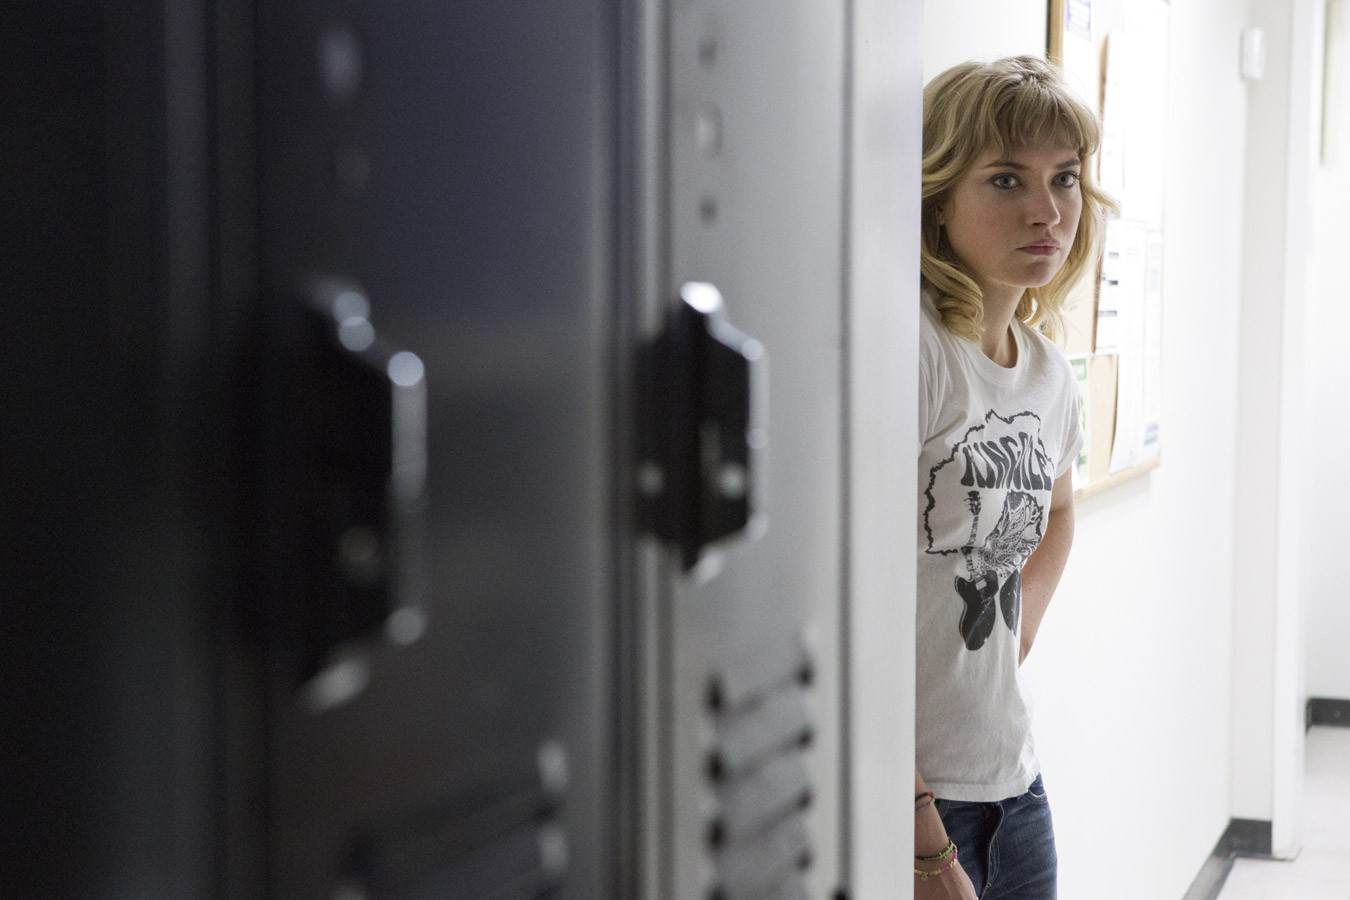 Imogen Poots stars as Julia in Walt Disney Pictures' Need for Speed (2014). Photo credit by Melinda Sue Gordon.